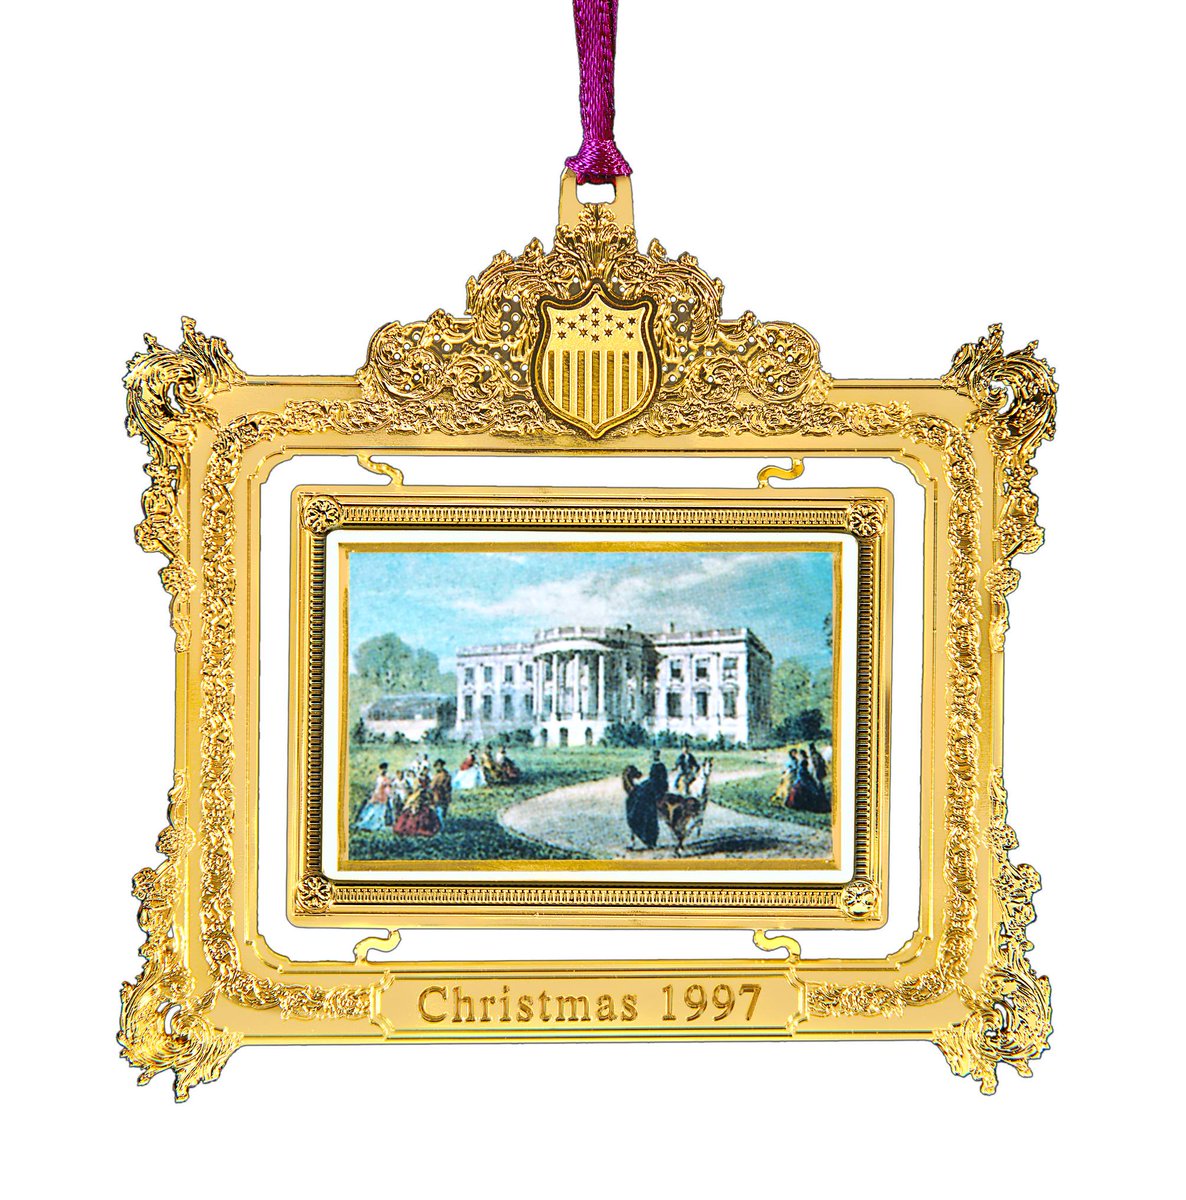 The 1997 ornament honors the administration of our 14th president, Franklin Pierce. The fancy gilt frame is based upon the elaborate gold-leafed frames of two huge mirrors Pierce hung in the state parlors. https://shop.whitehousehistory.org/holidays/ornaments/1994-to-1997-white-house-christmas-ornaments-sold-as-a-set-of-four